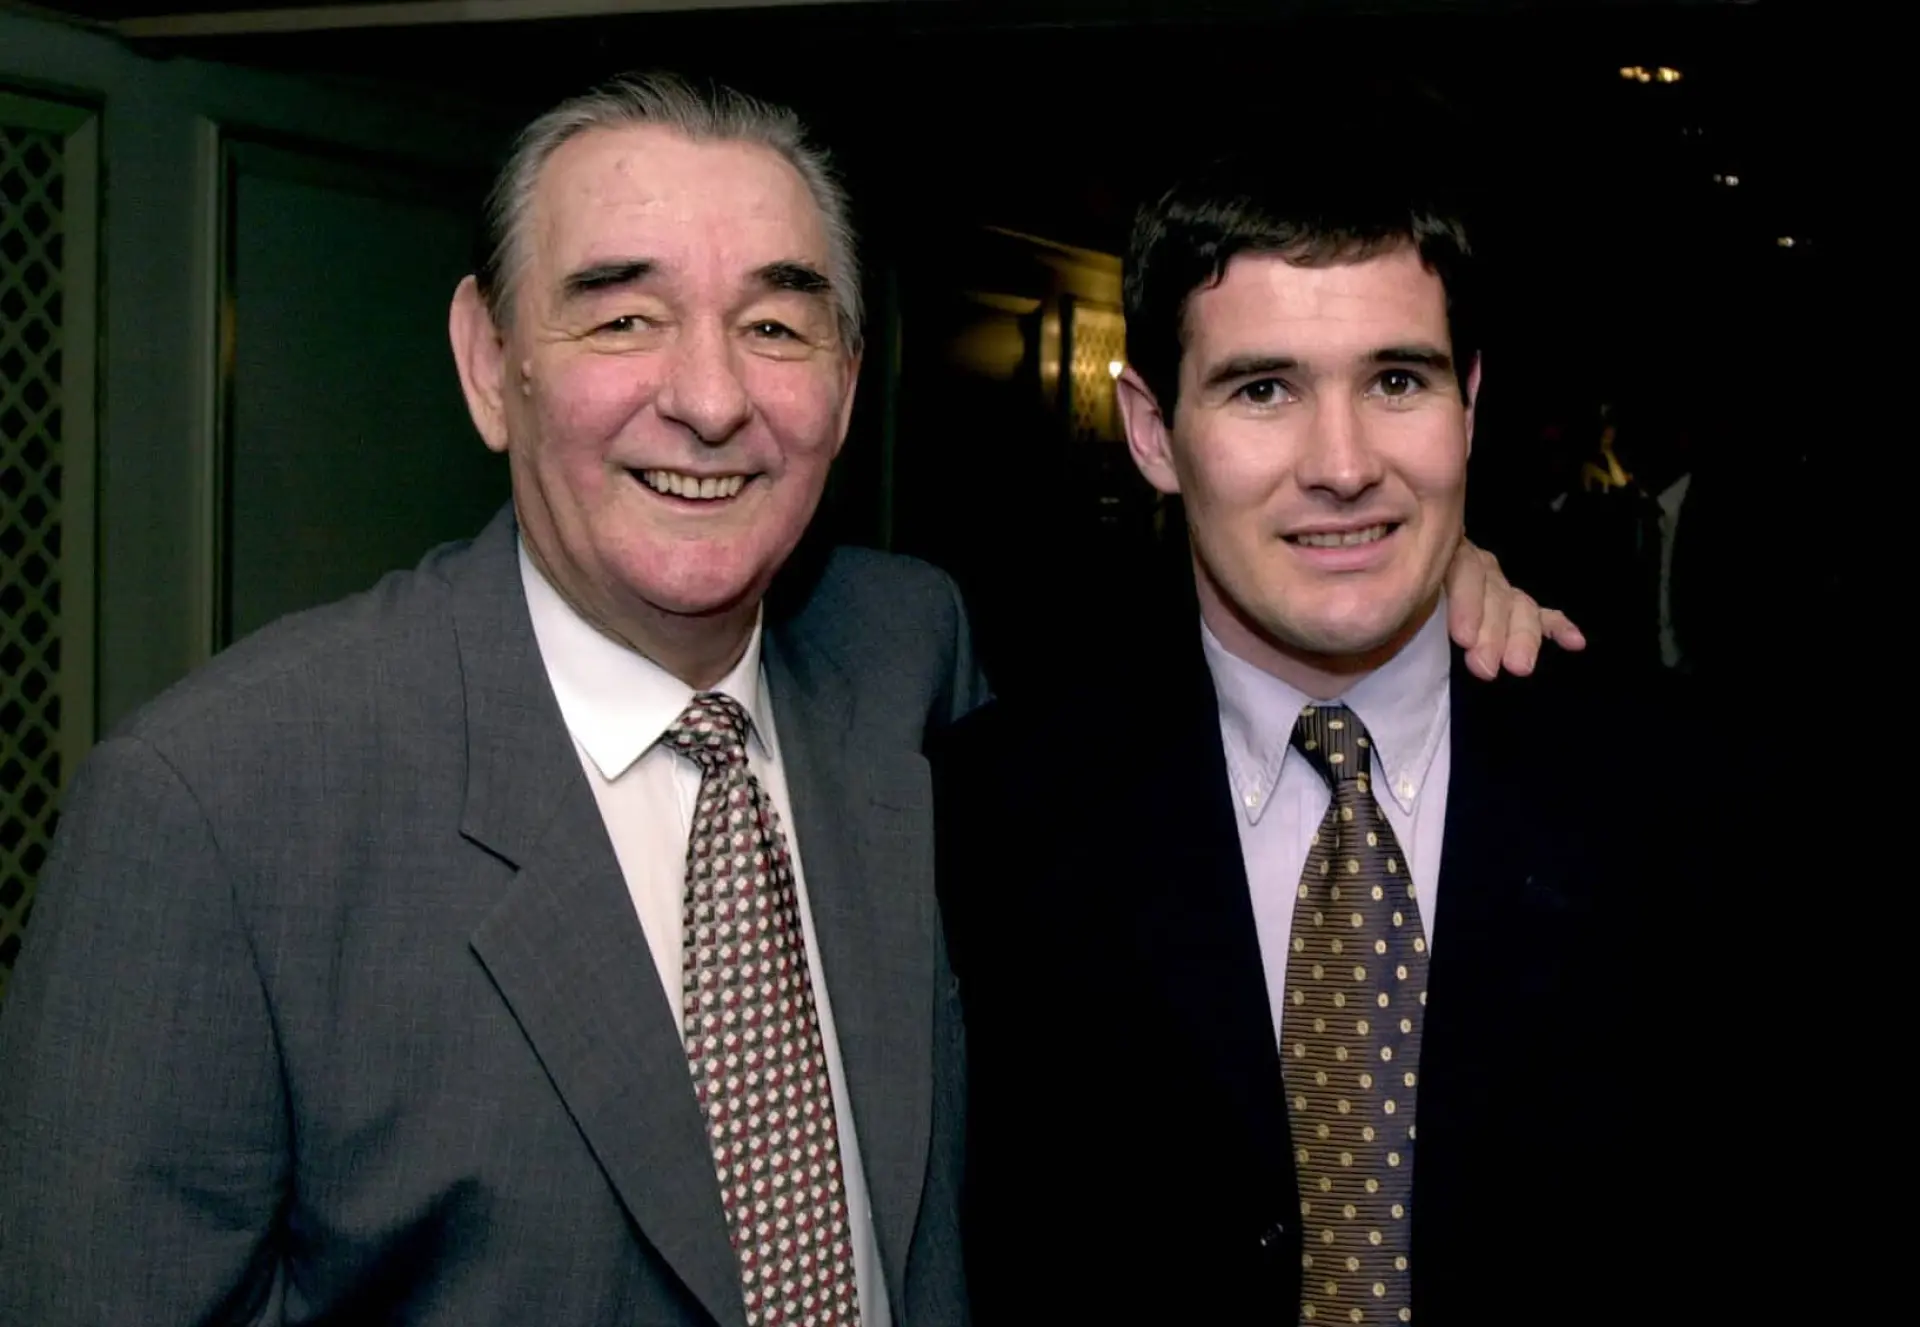 Brian Clough, Nigel Clough, Fathers and sons professional footballers